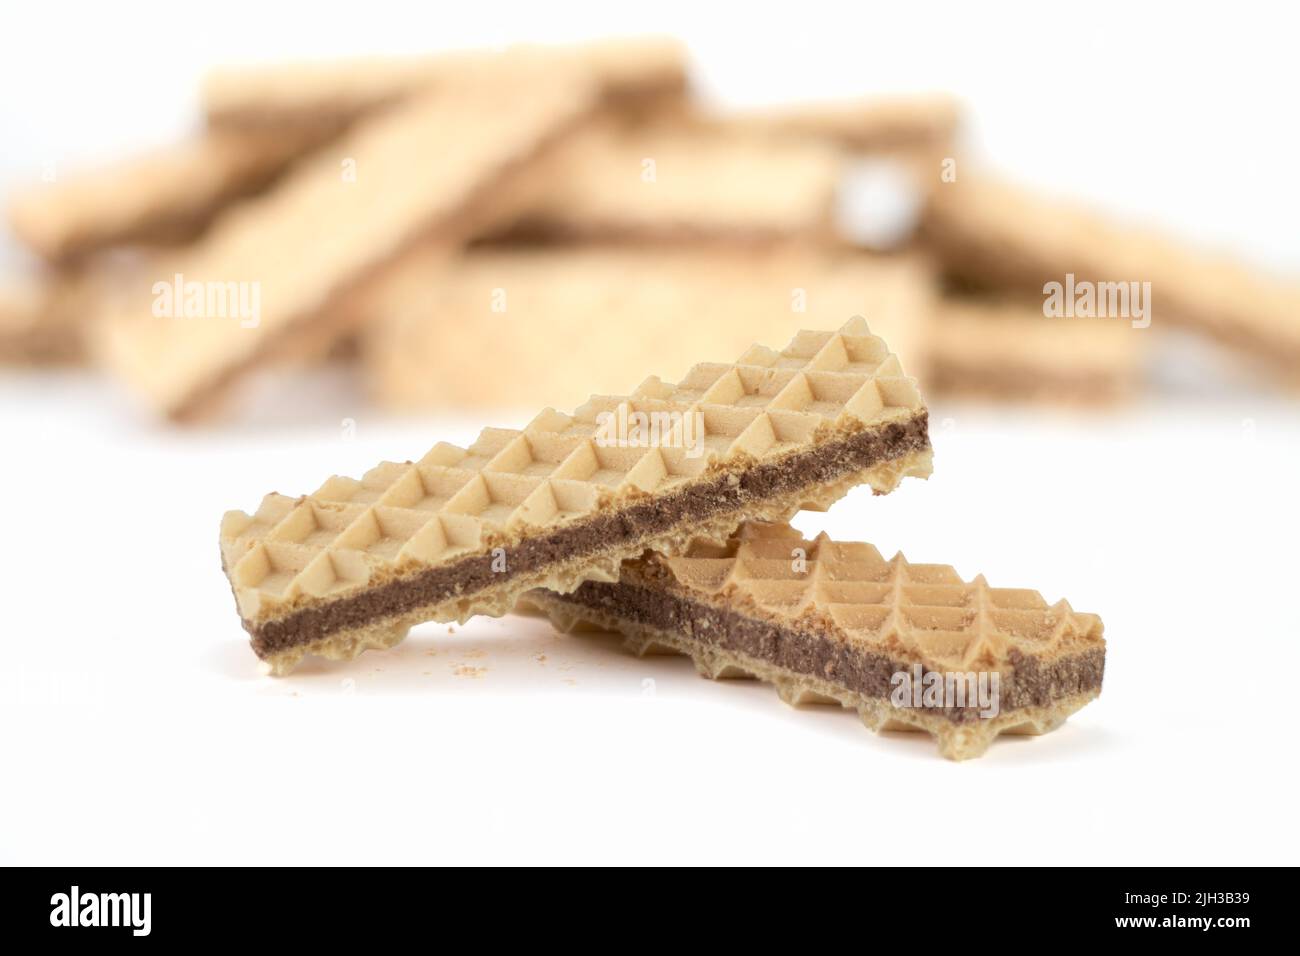 Delicious chocolate wafer on bright background. Close up view. Selective focus. Stock Photo